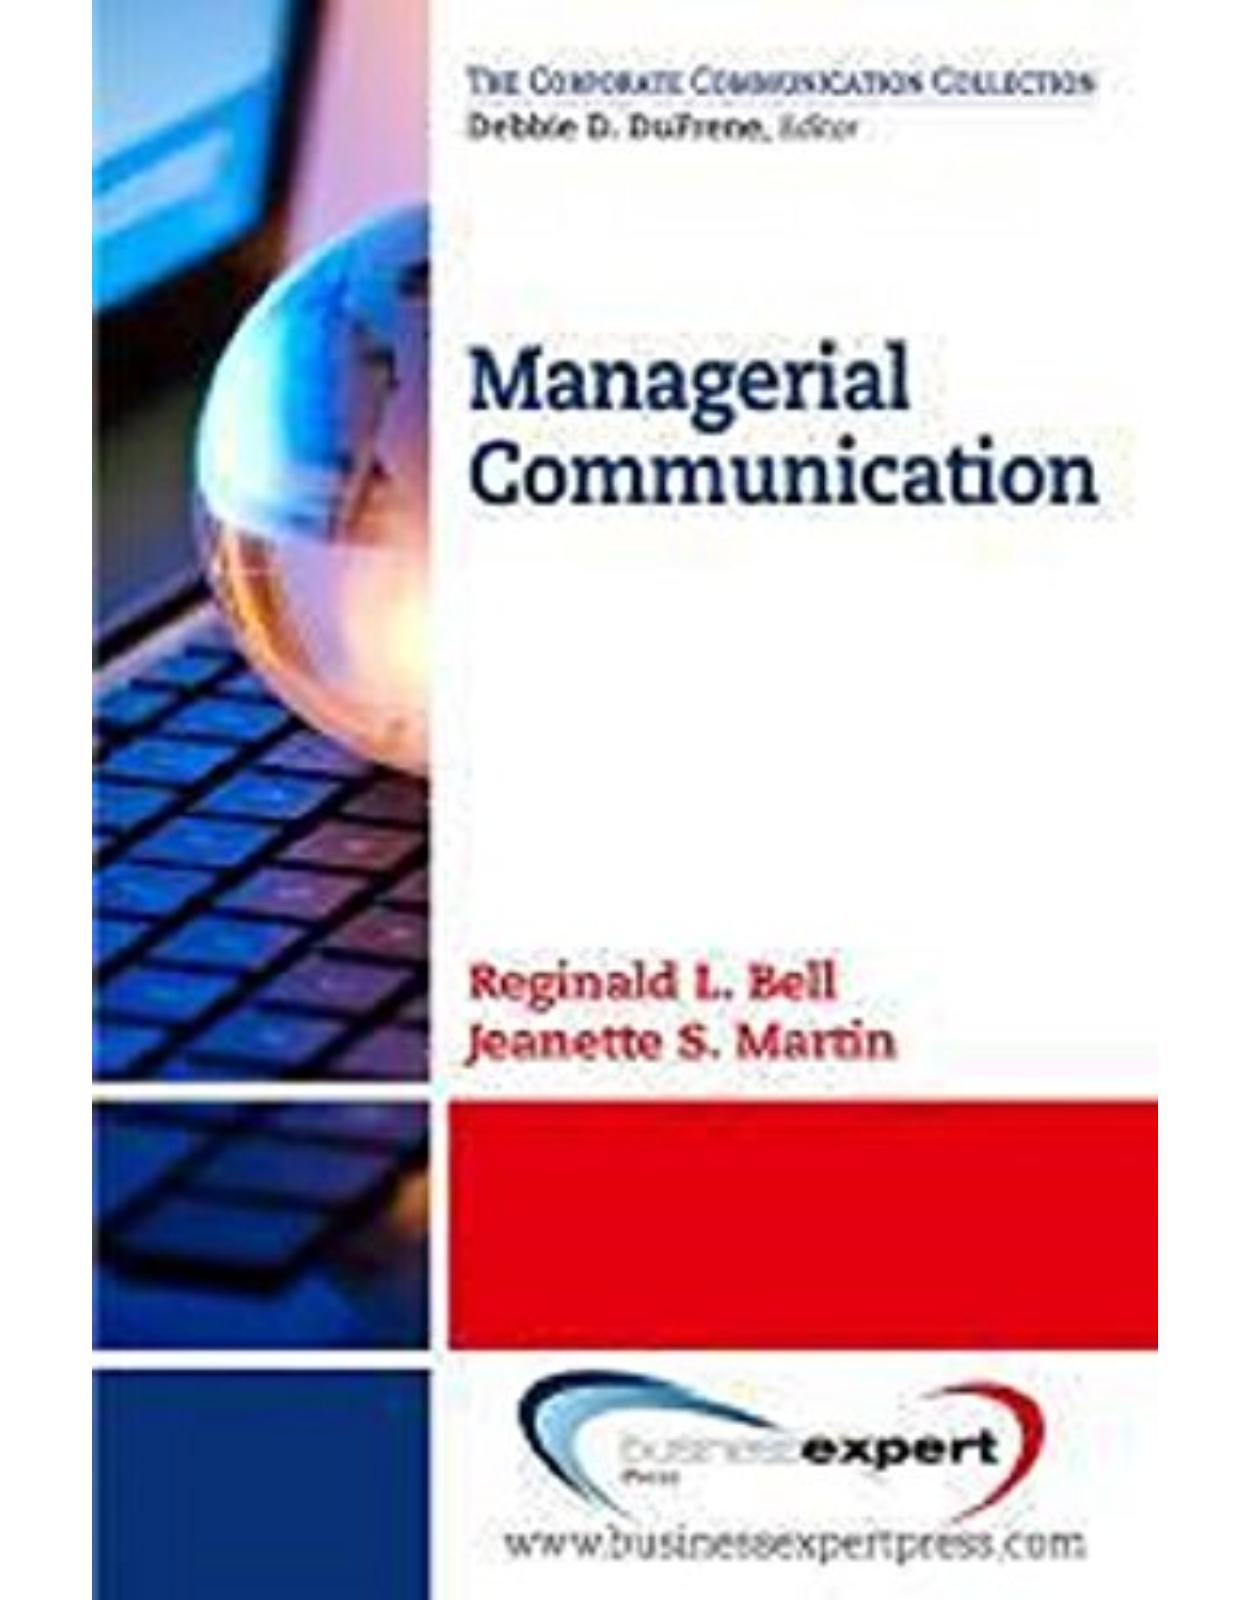 Managerial Communication (Corporate Communication Collection) 